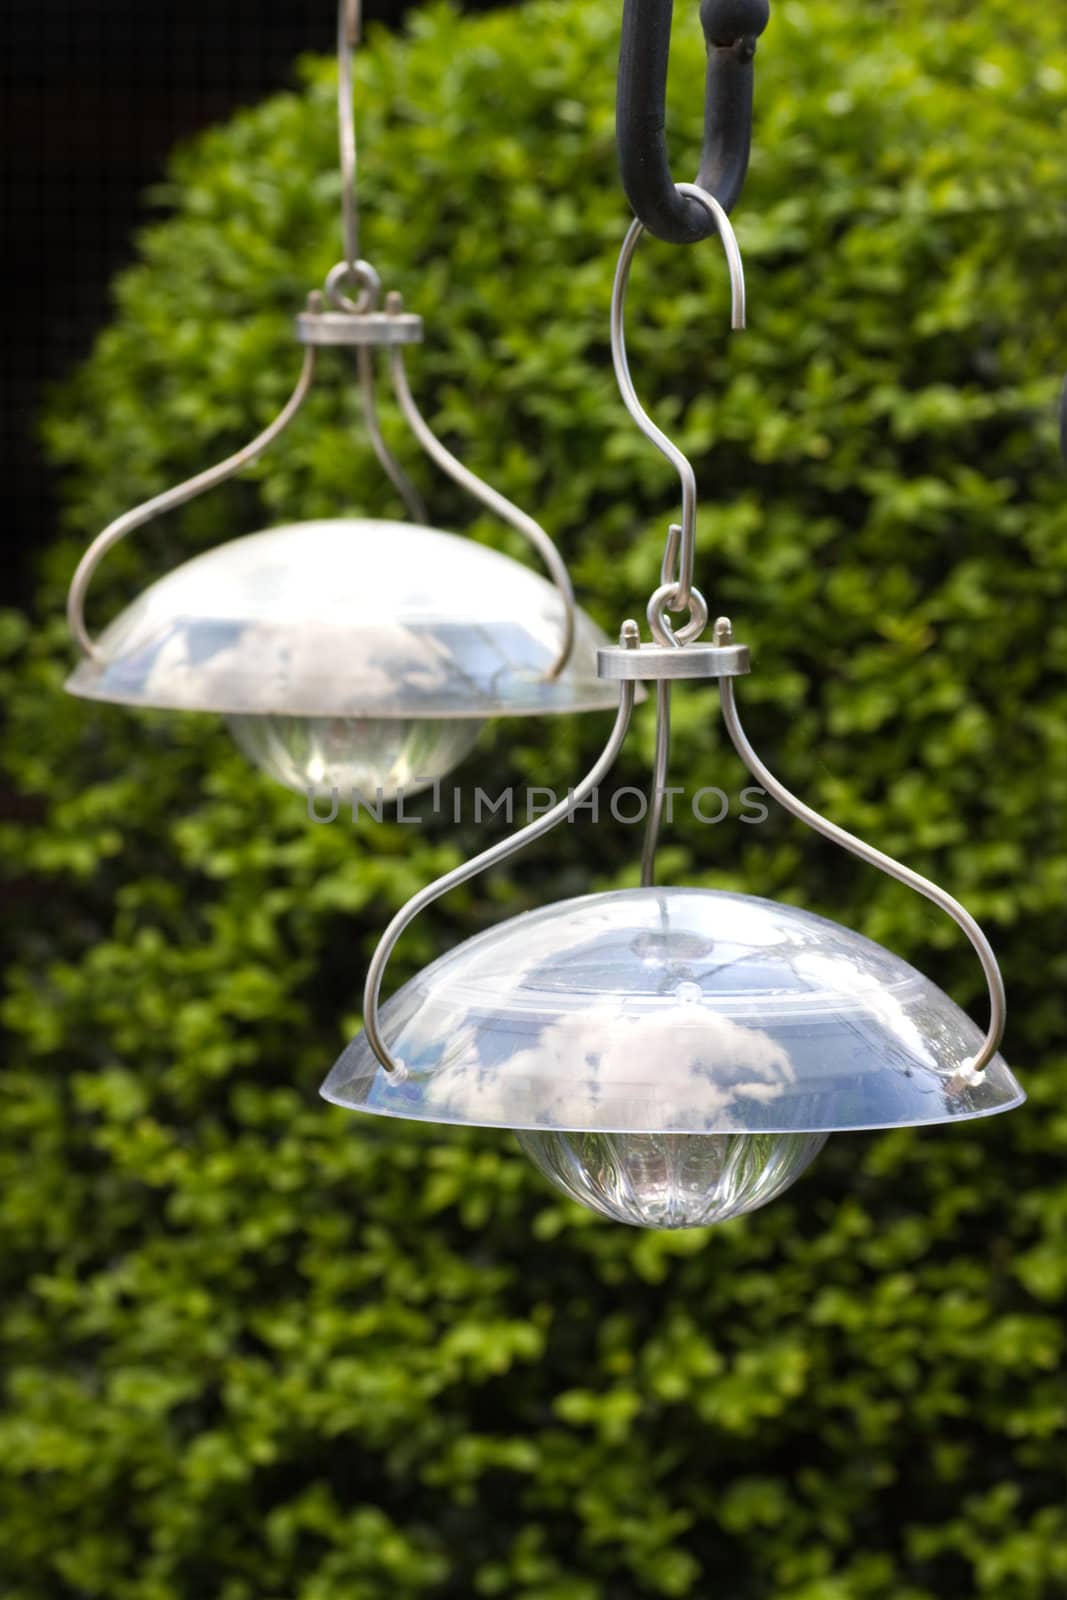 Decorative hanging solar lamps with reflection of clouds in sky to illuminate garden at night